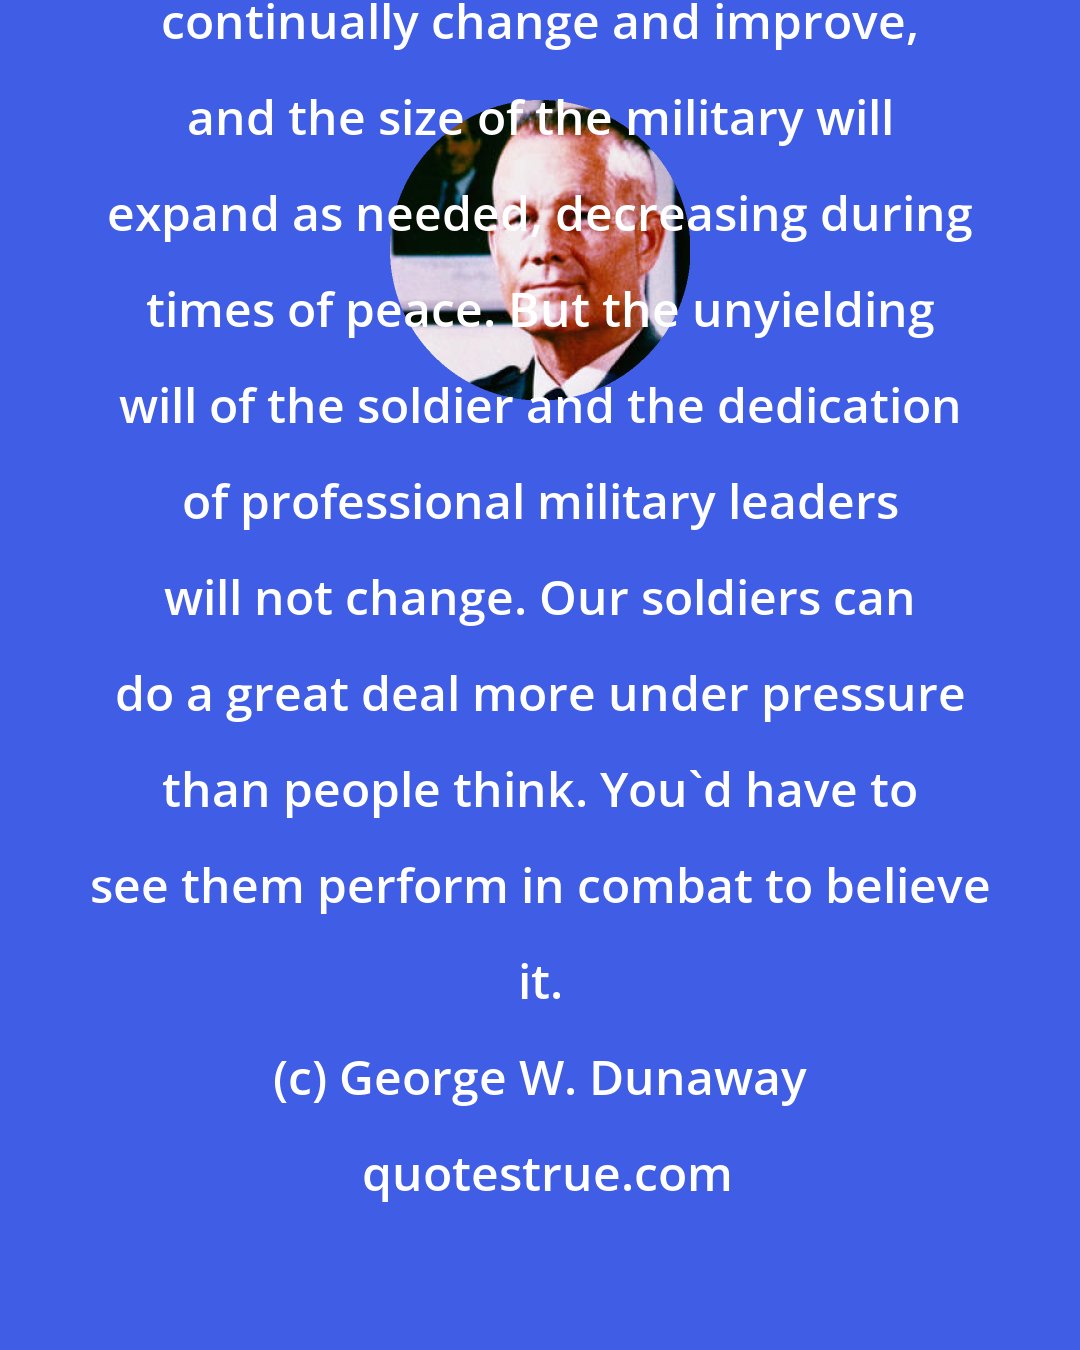 George W. Dunaway: The equipment and weaponry will continually change and improve, and the size of the military will expand as needed, decreasing during times of peace. But the unyielding will of the soldier and the dedication of professional military leaders will not change. Our soldiers can do a great deal more under pressure than people think. You'd have to see them perform in combat to believe it.